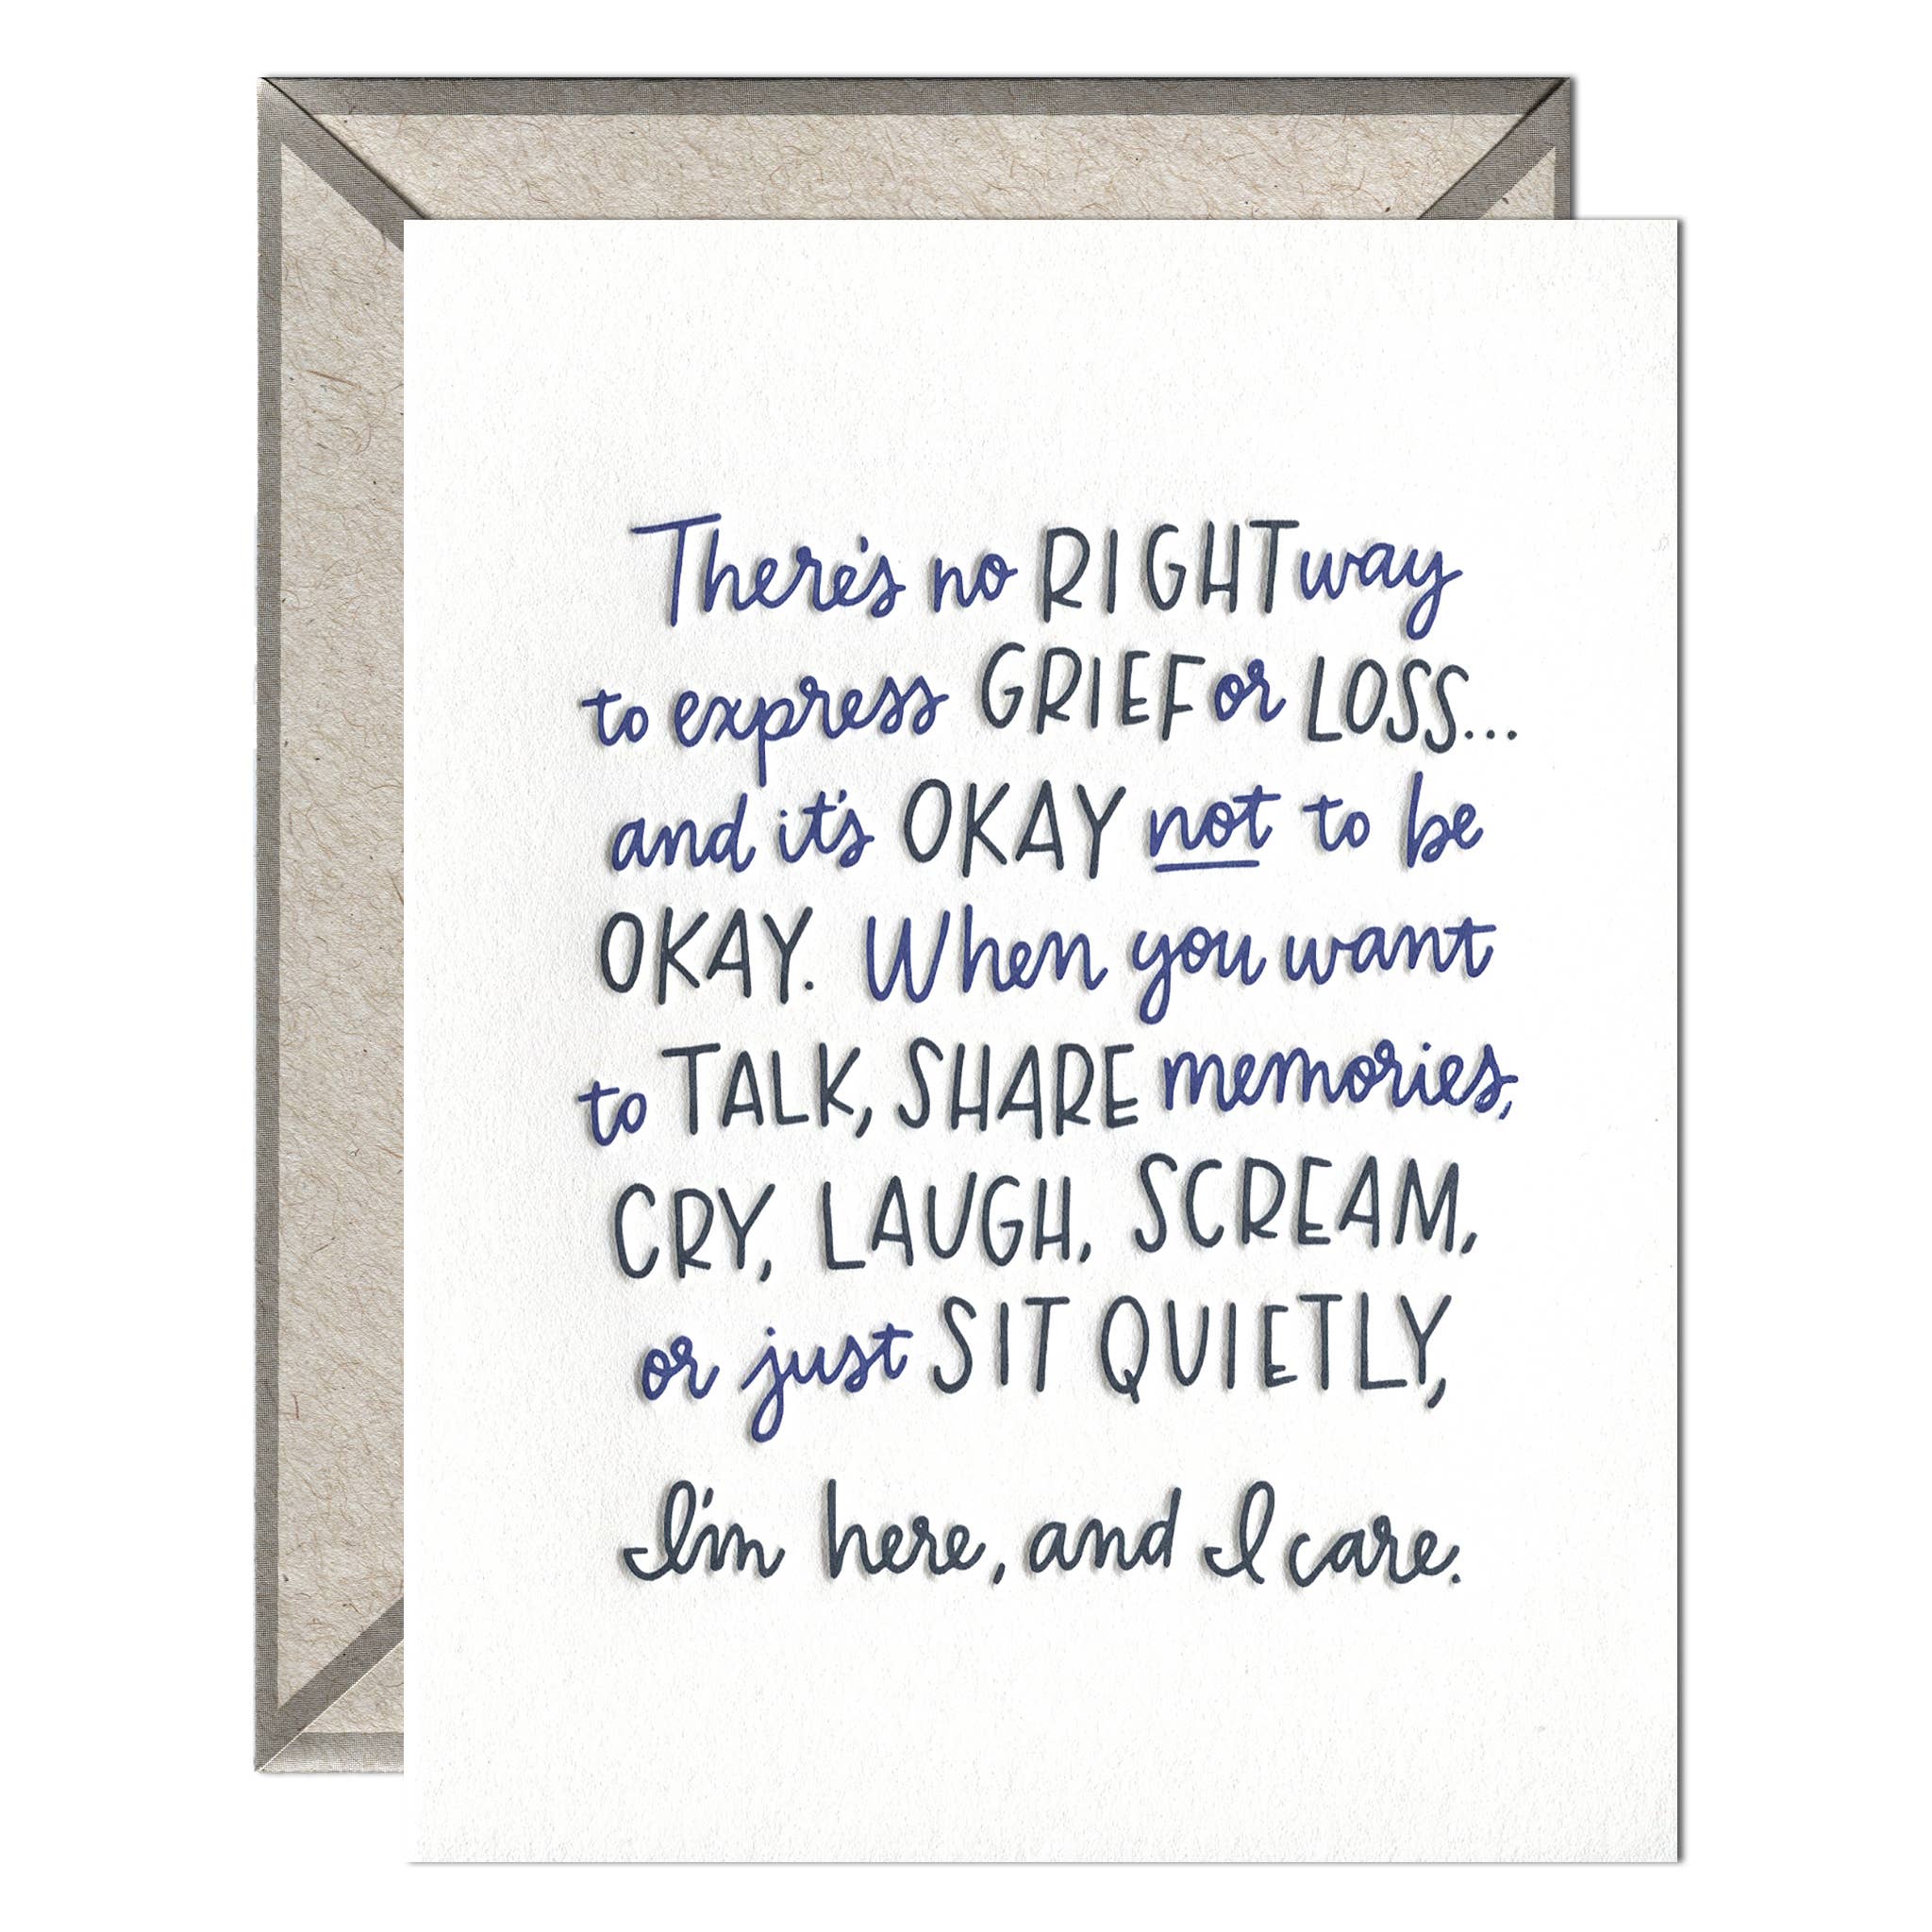 No Right Way to Grieve - Sympathy card